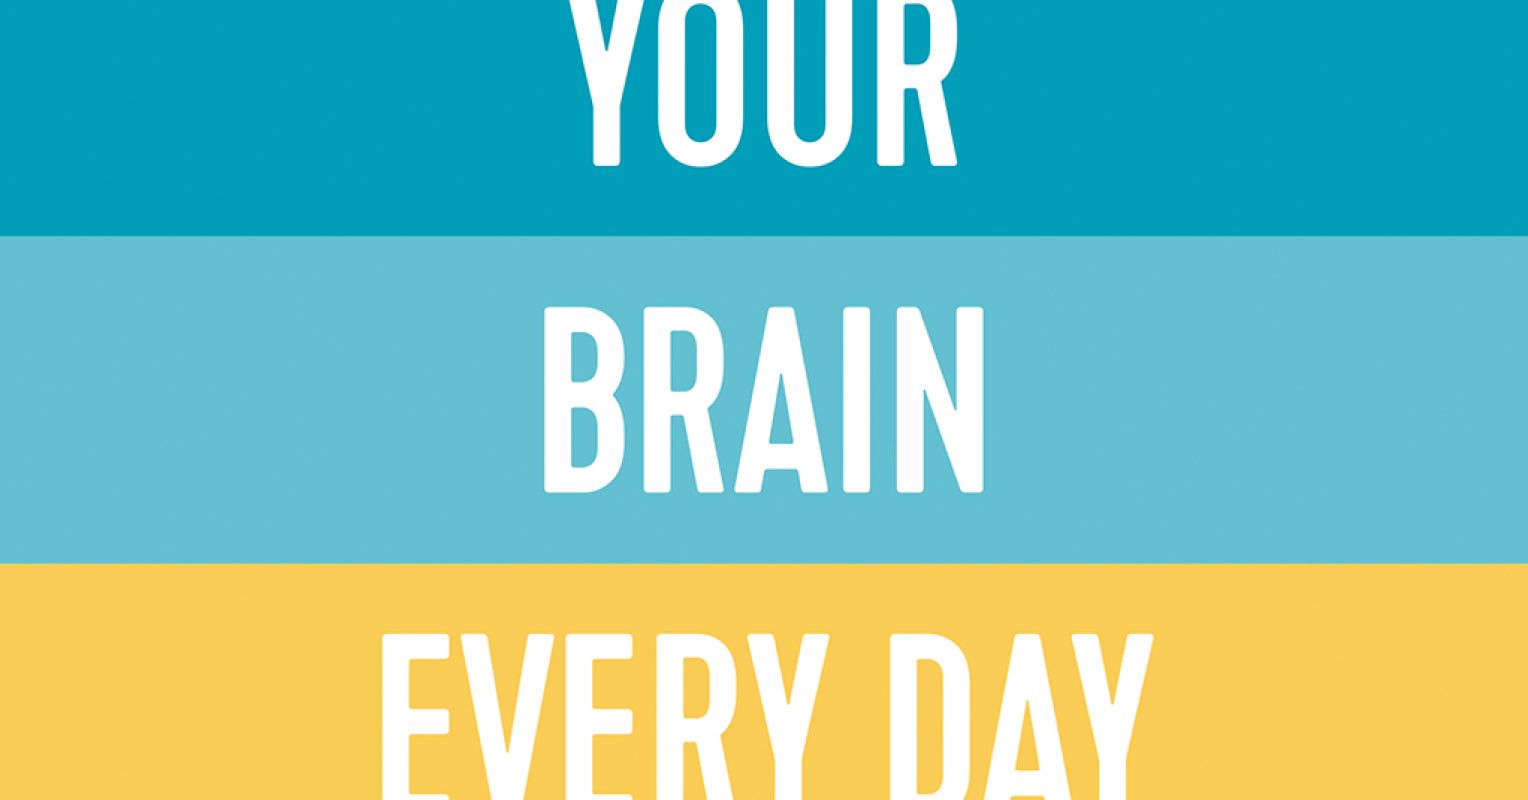 Change Your Brain Every Day, Shop Today. Get it Tomorrow!